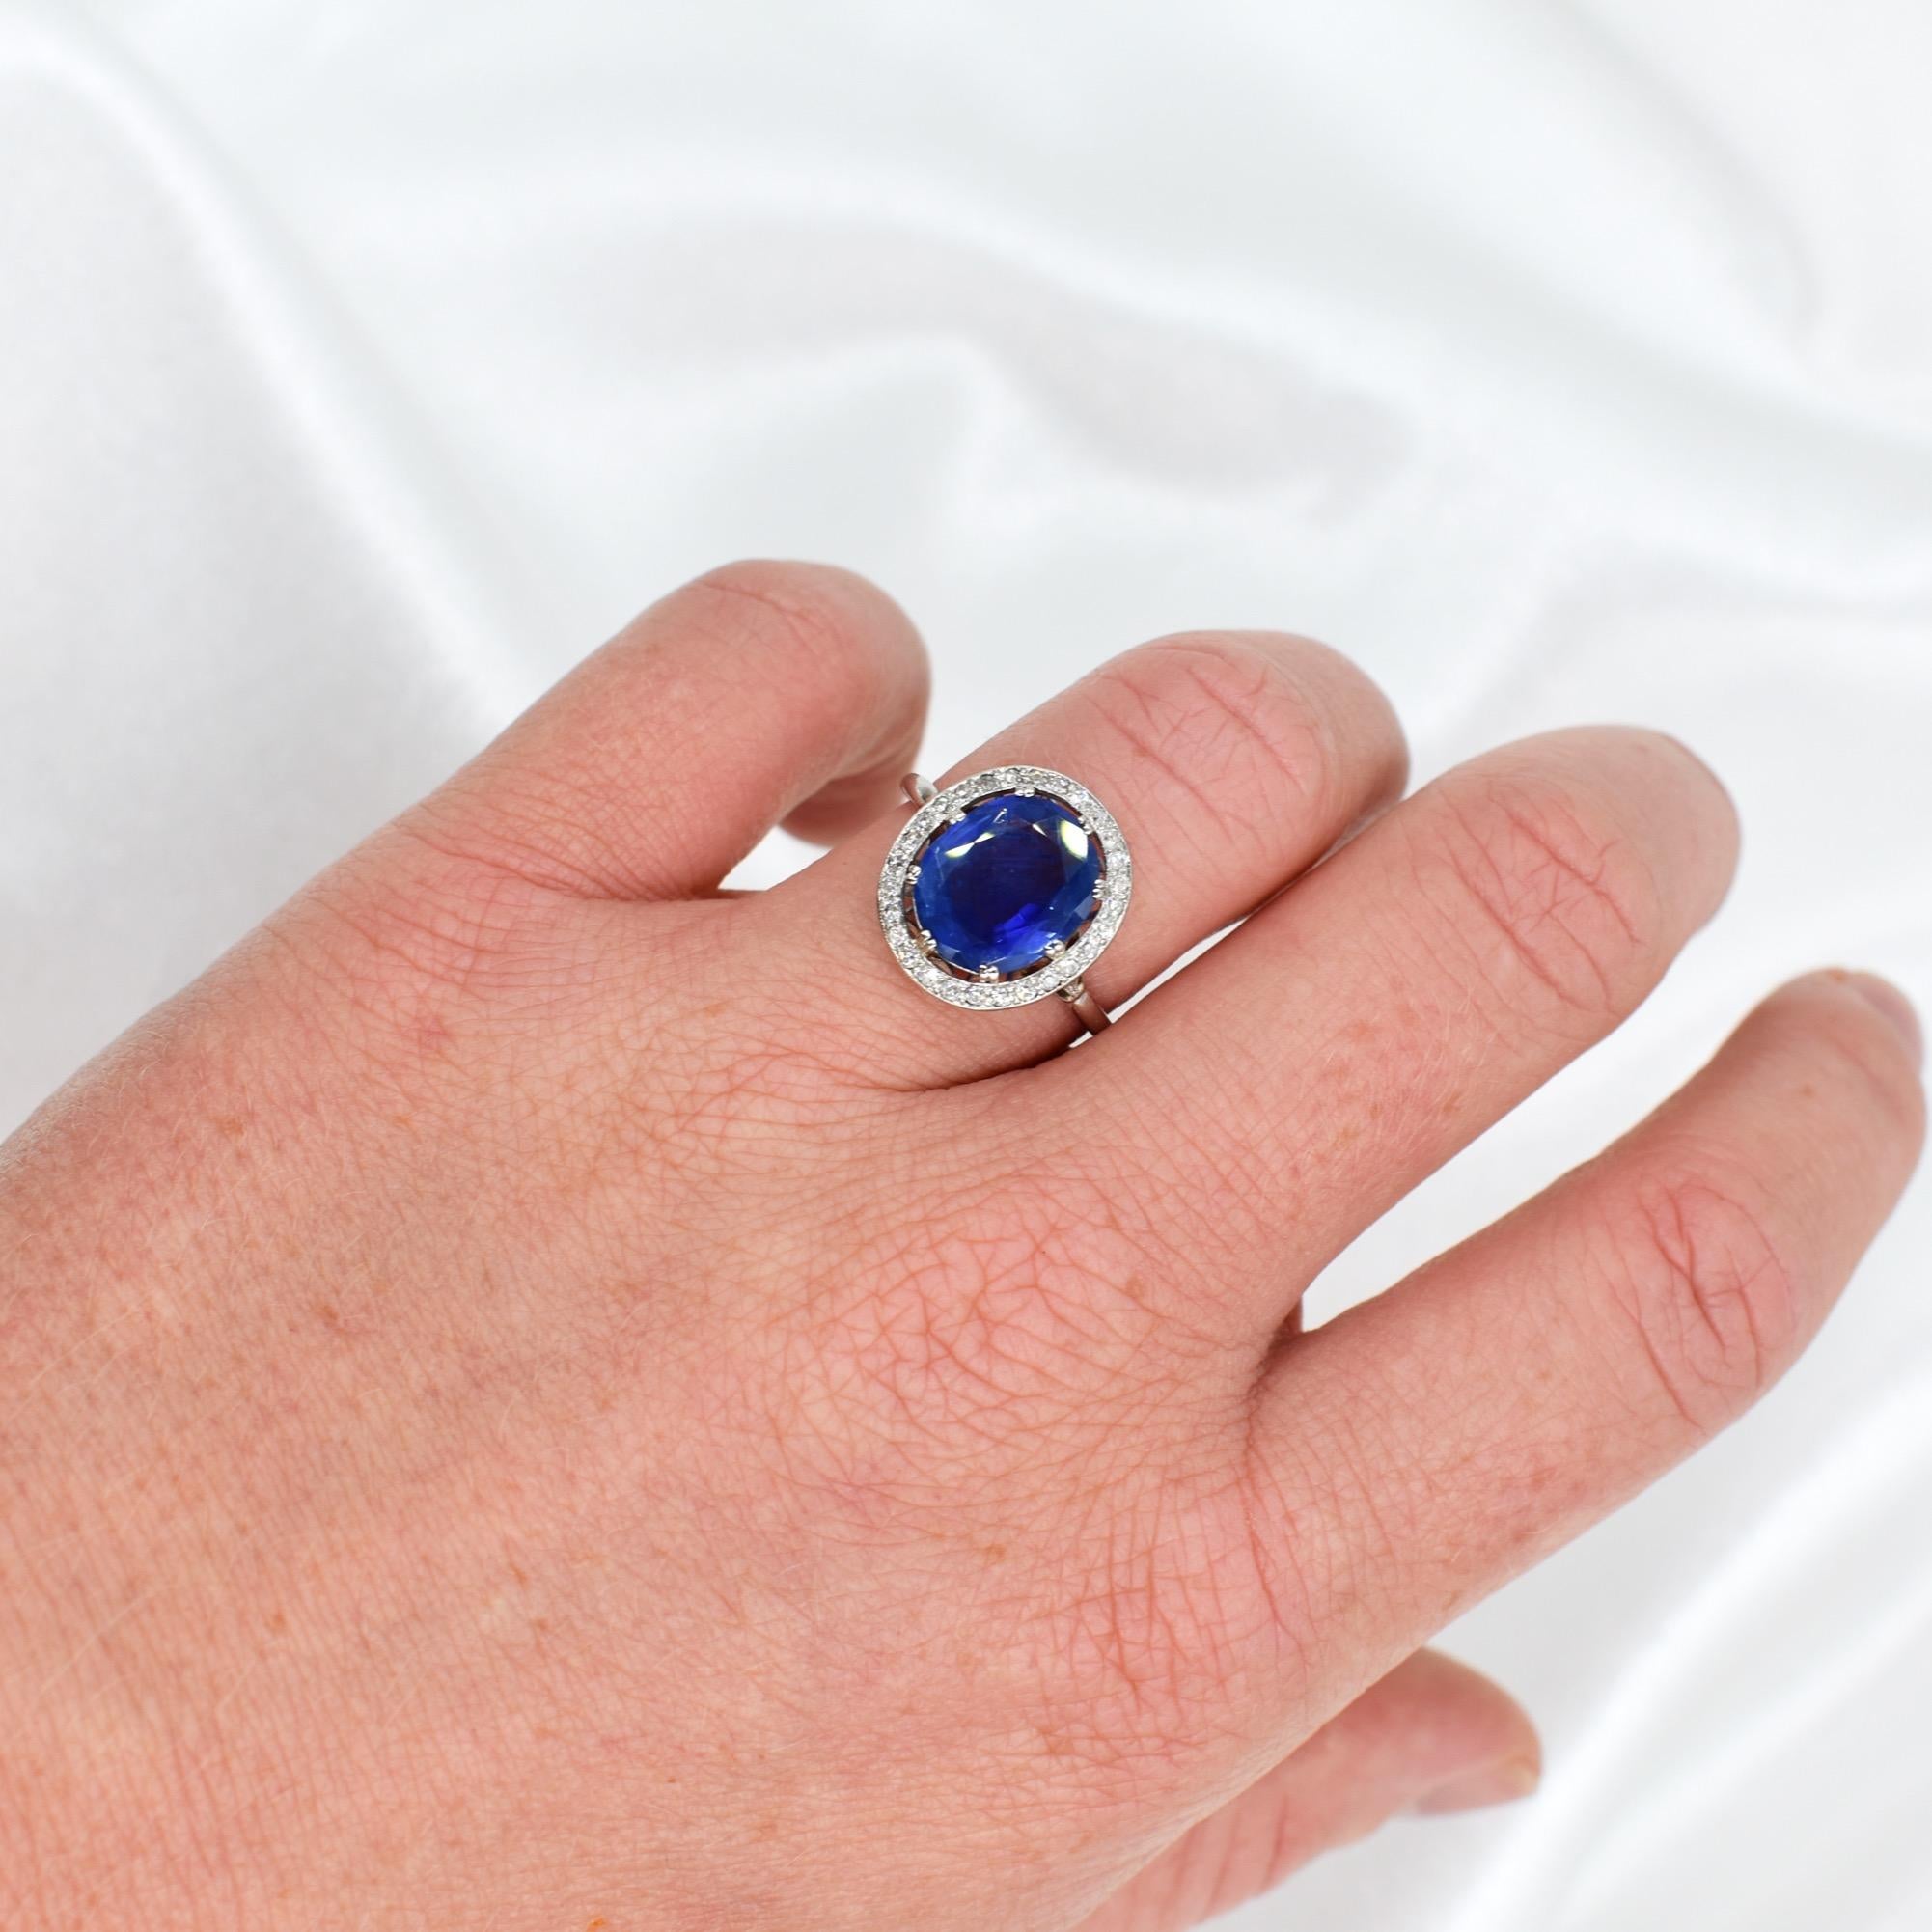 Superb antique Pompadour ring from the 1920s. Crafted in platinum, it features a magnificent natural unheated Ceylon sapphire of approximately 3.5 carats (11.1 x 9.4 x 4.0 mm), surrounded by diamonds to enhance its beauty. The work on the back of